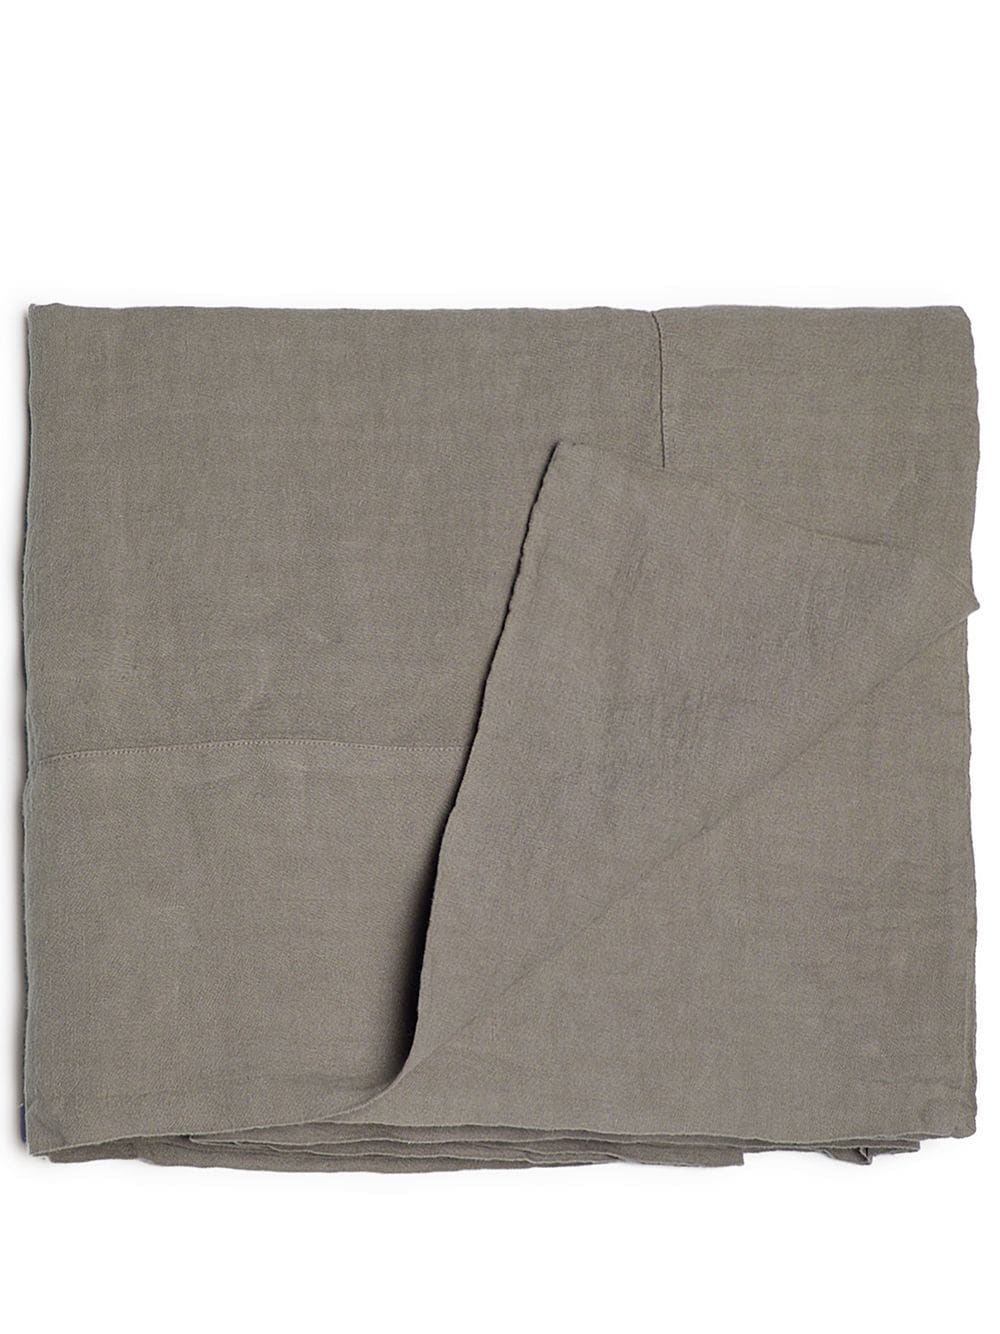 Image 1 of Once Milano medium linen tablecloth